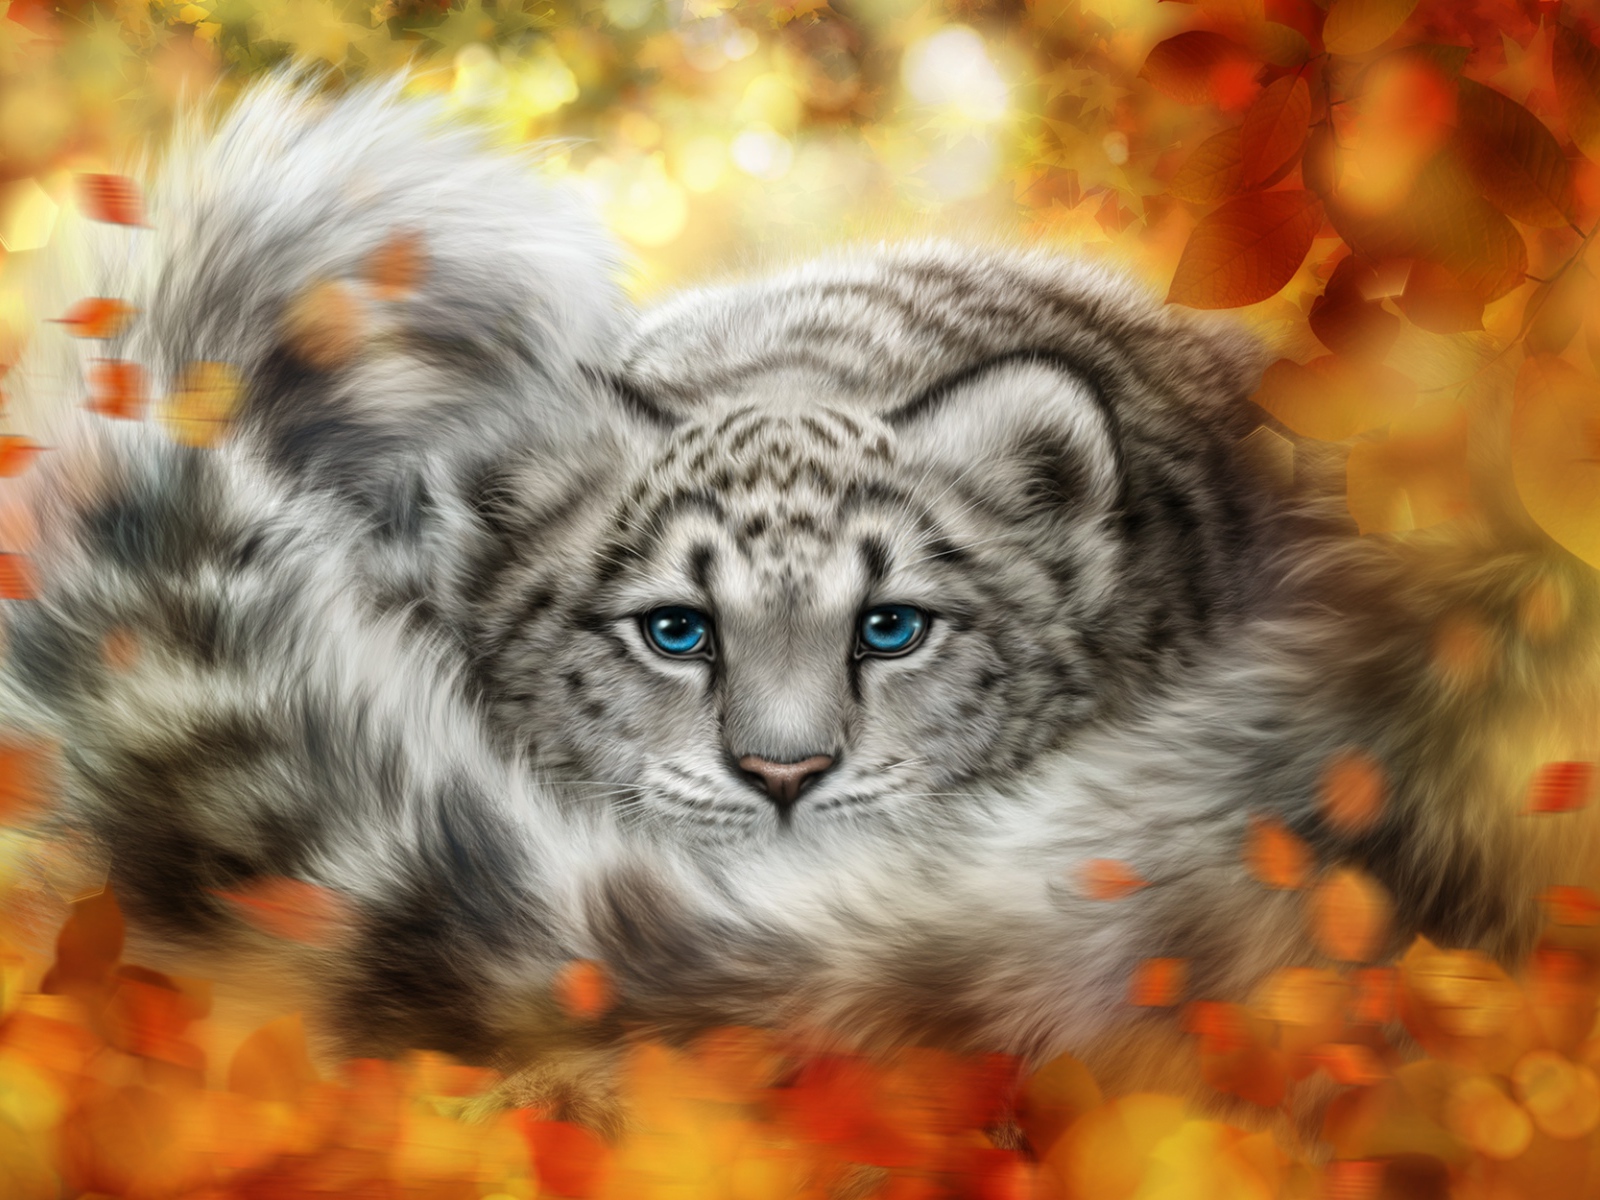 Young snow leopard in yellow leaves, drawing